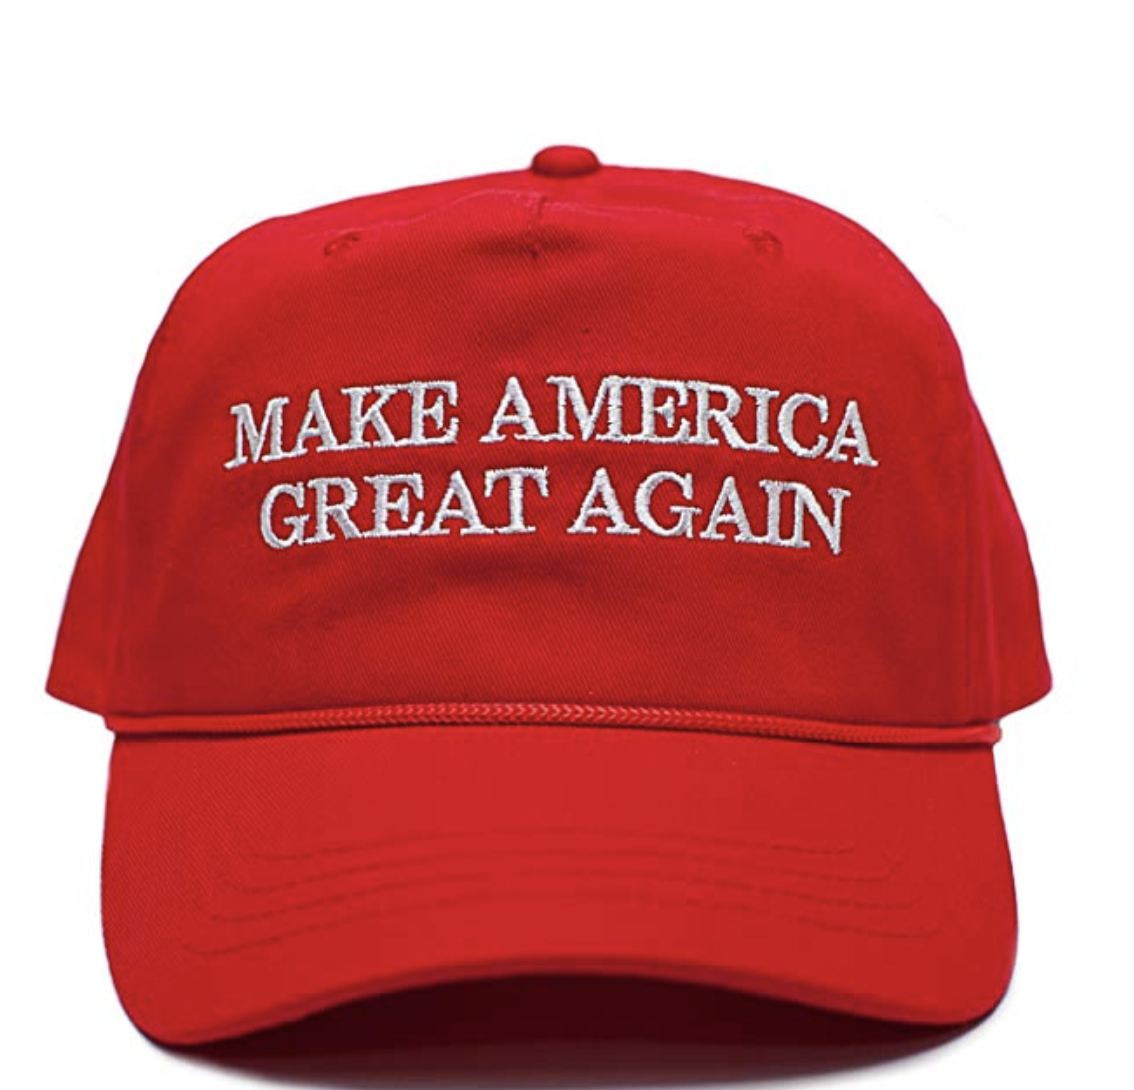 Red baseball cap with white text reading "Make America Great Again", also referred to as MAGA.